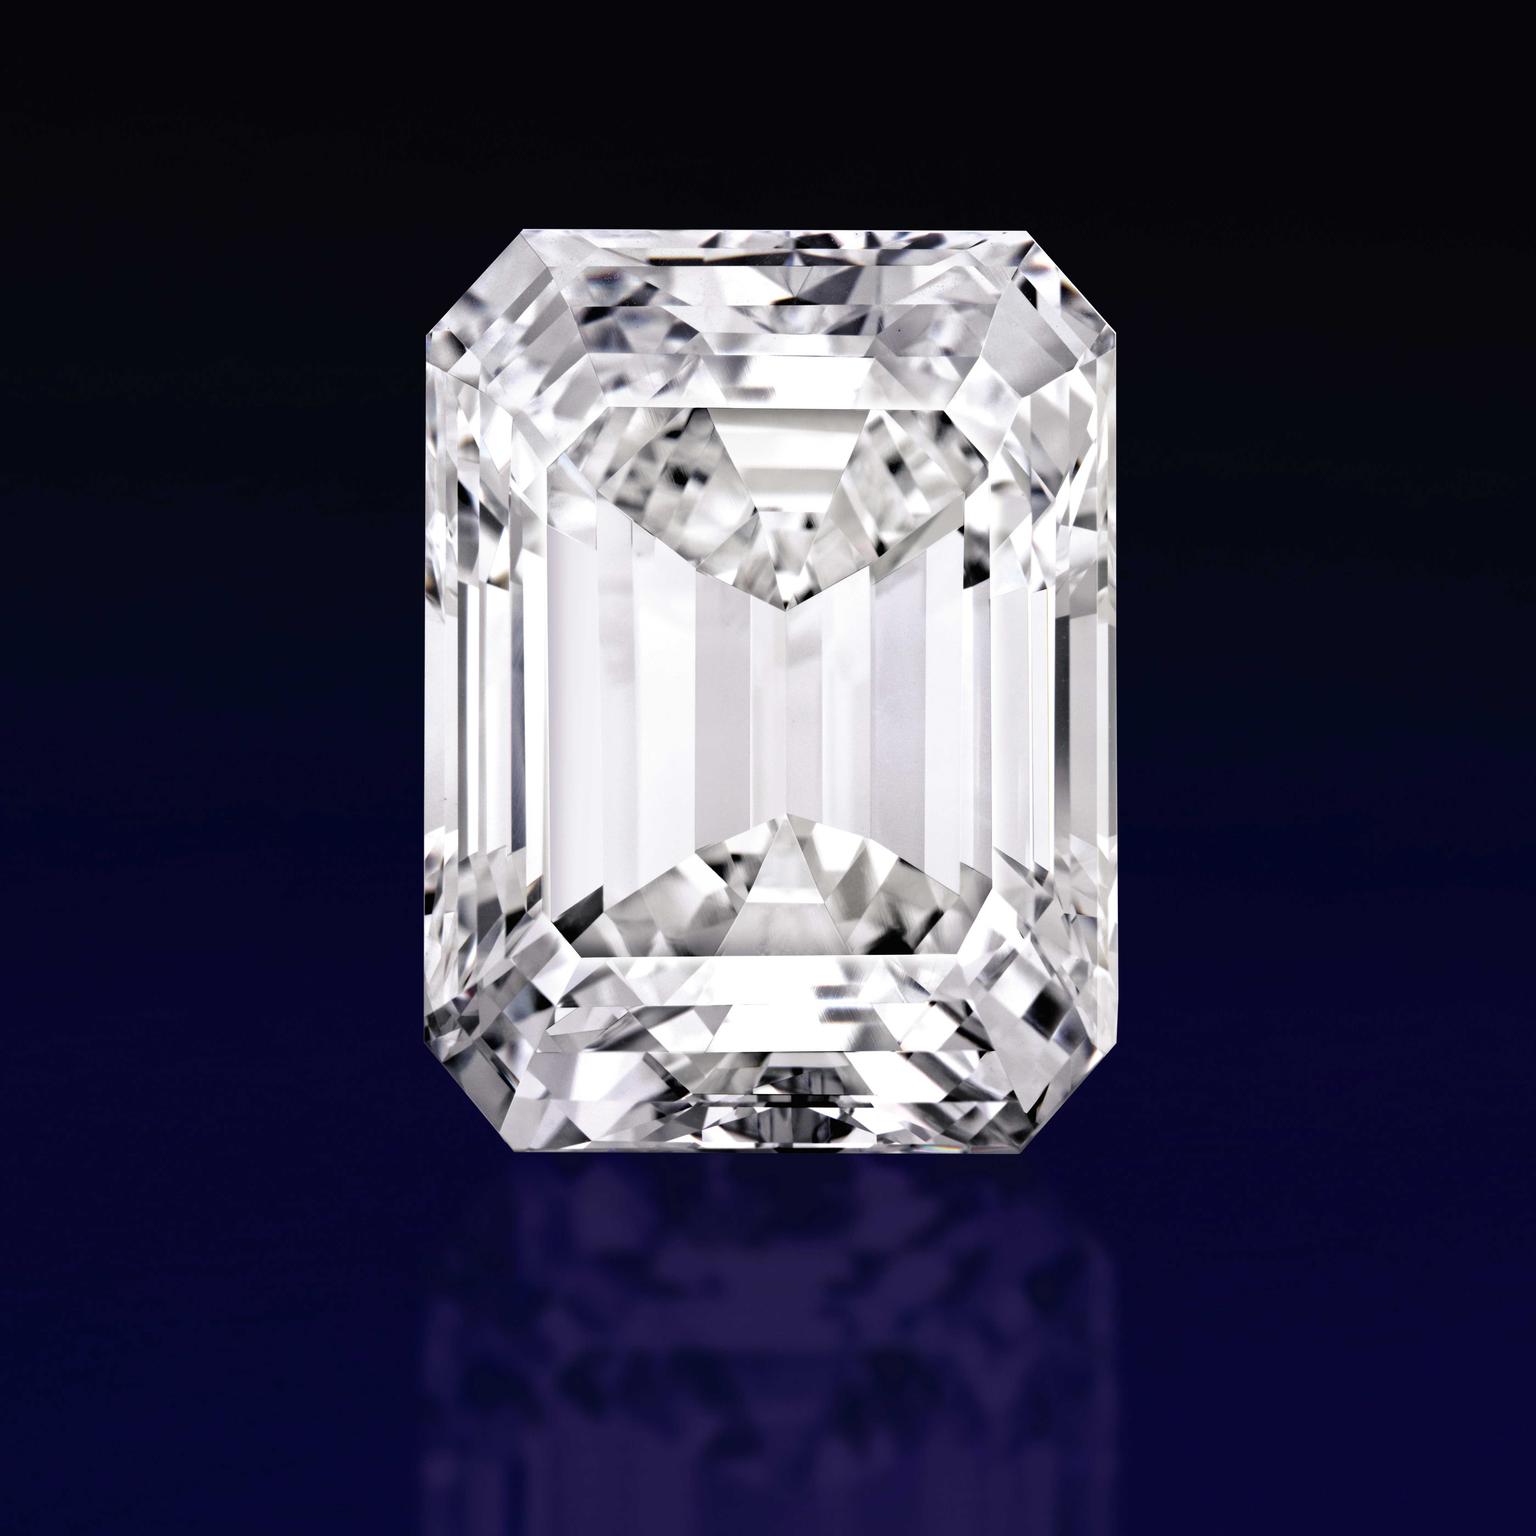 Sold in April 2015, the Ultimate Emerald cut is 100.20 carats D colour, but only Internally Flawless. It sold in Sotheby’s New York 21 for US$ 22.1 million or US$220.459 per carat and is the 4th most valuable white diamond ever sold at auction.